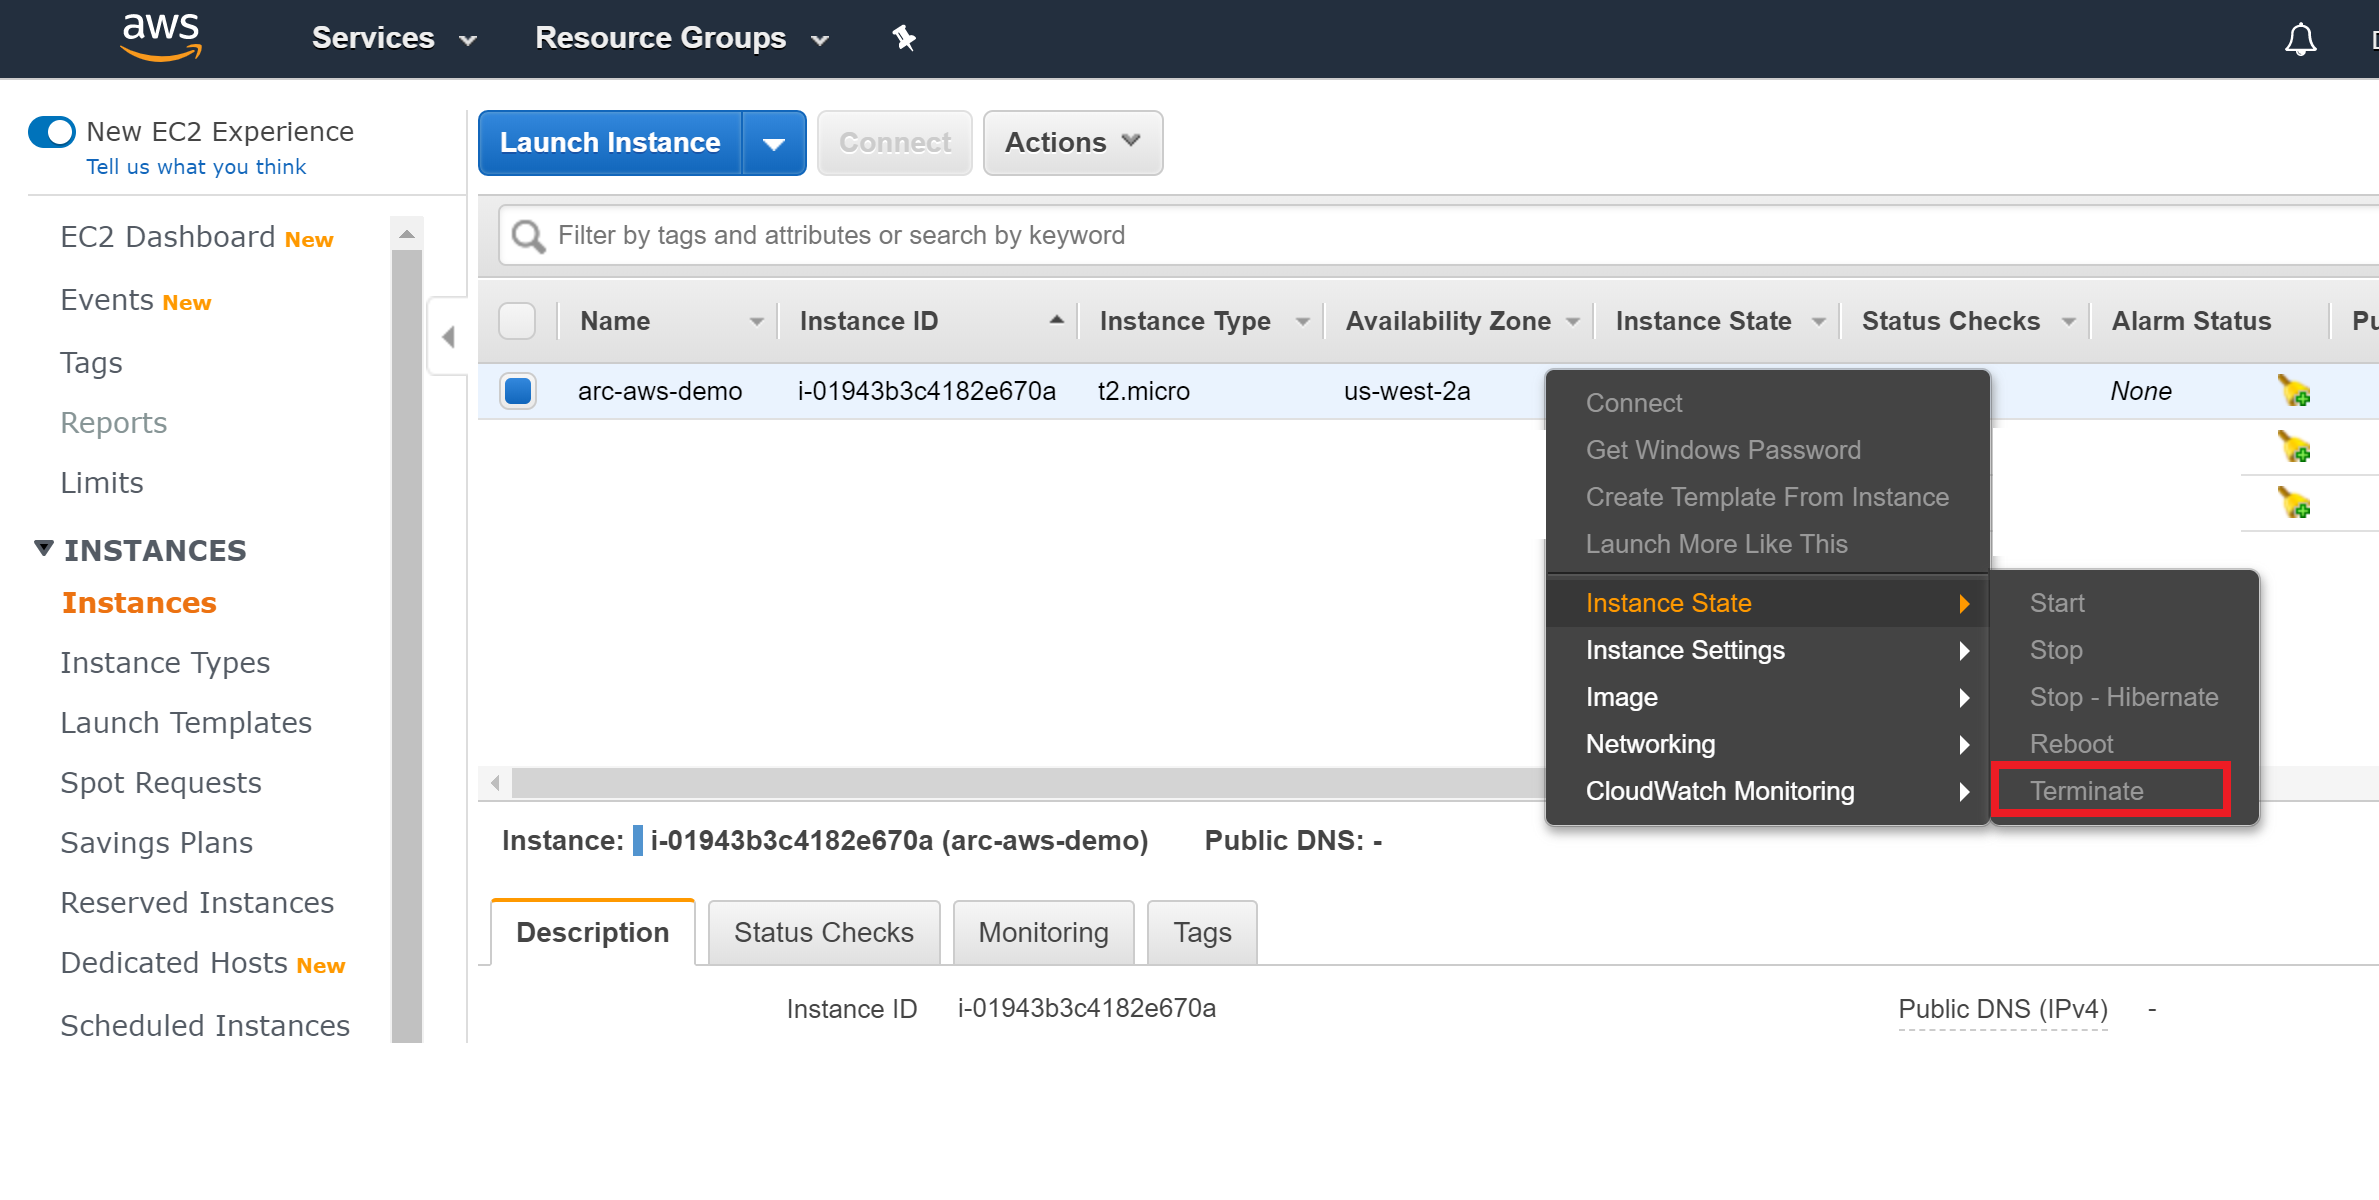 A screenshot of how to terminate an instance in the AWS console.